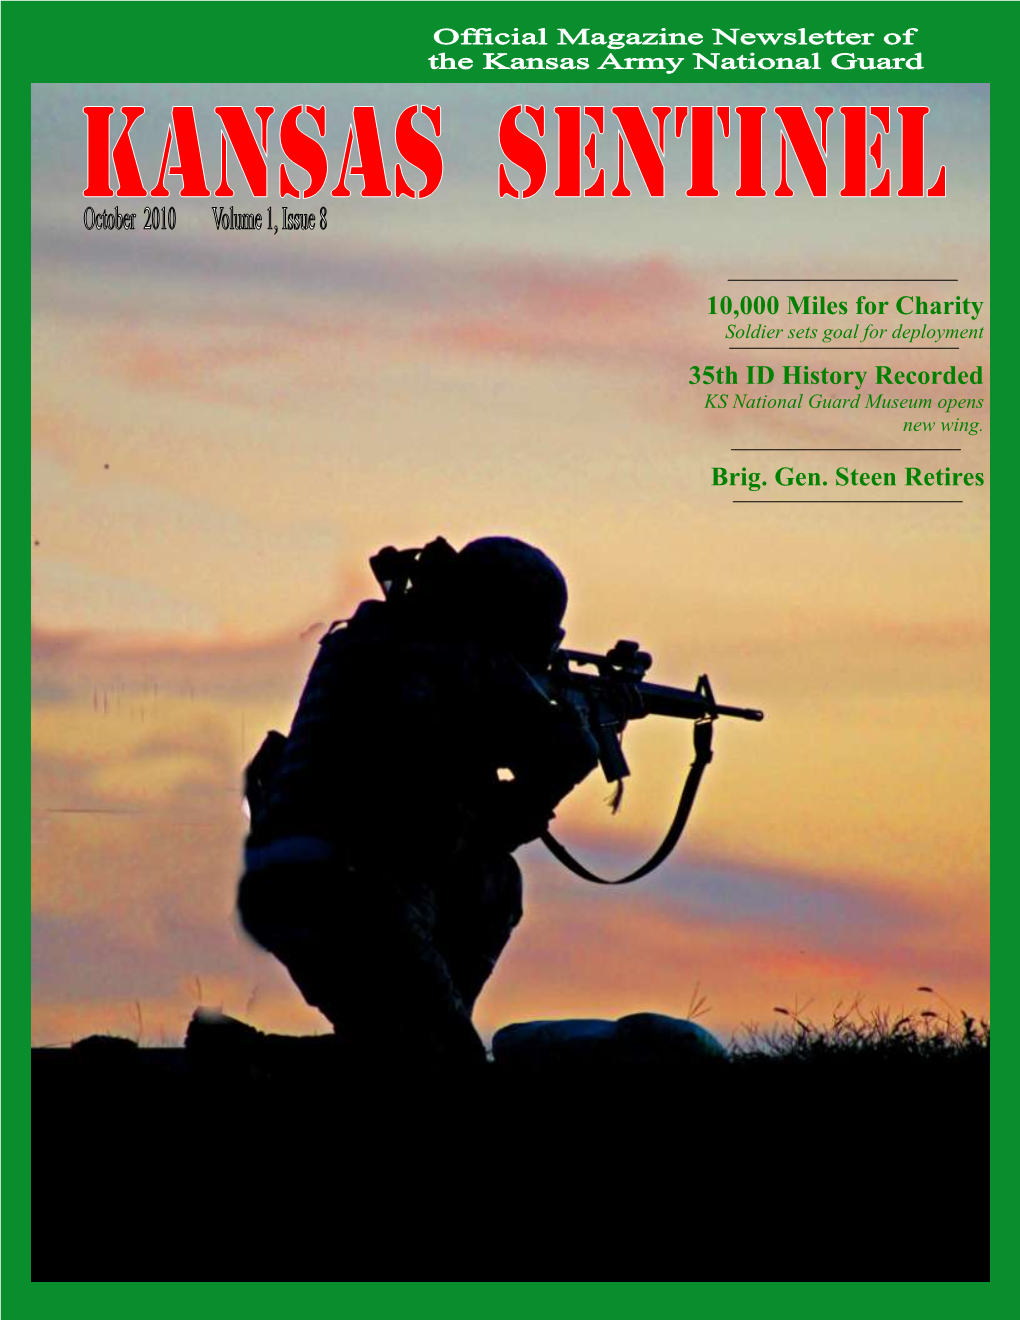 October 2010 Volume 1 Issue 8 Soldiers at Home and Deployed Abroad